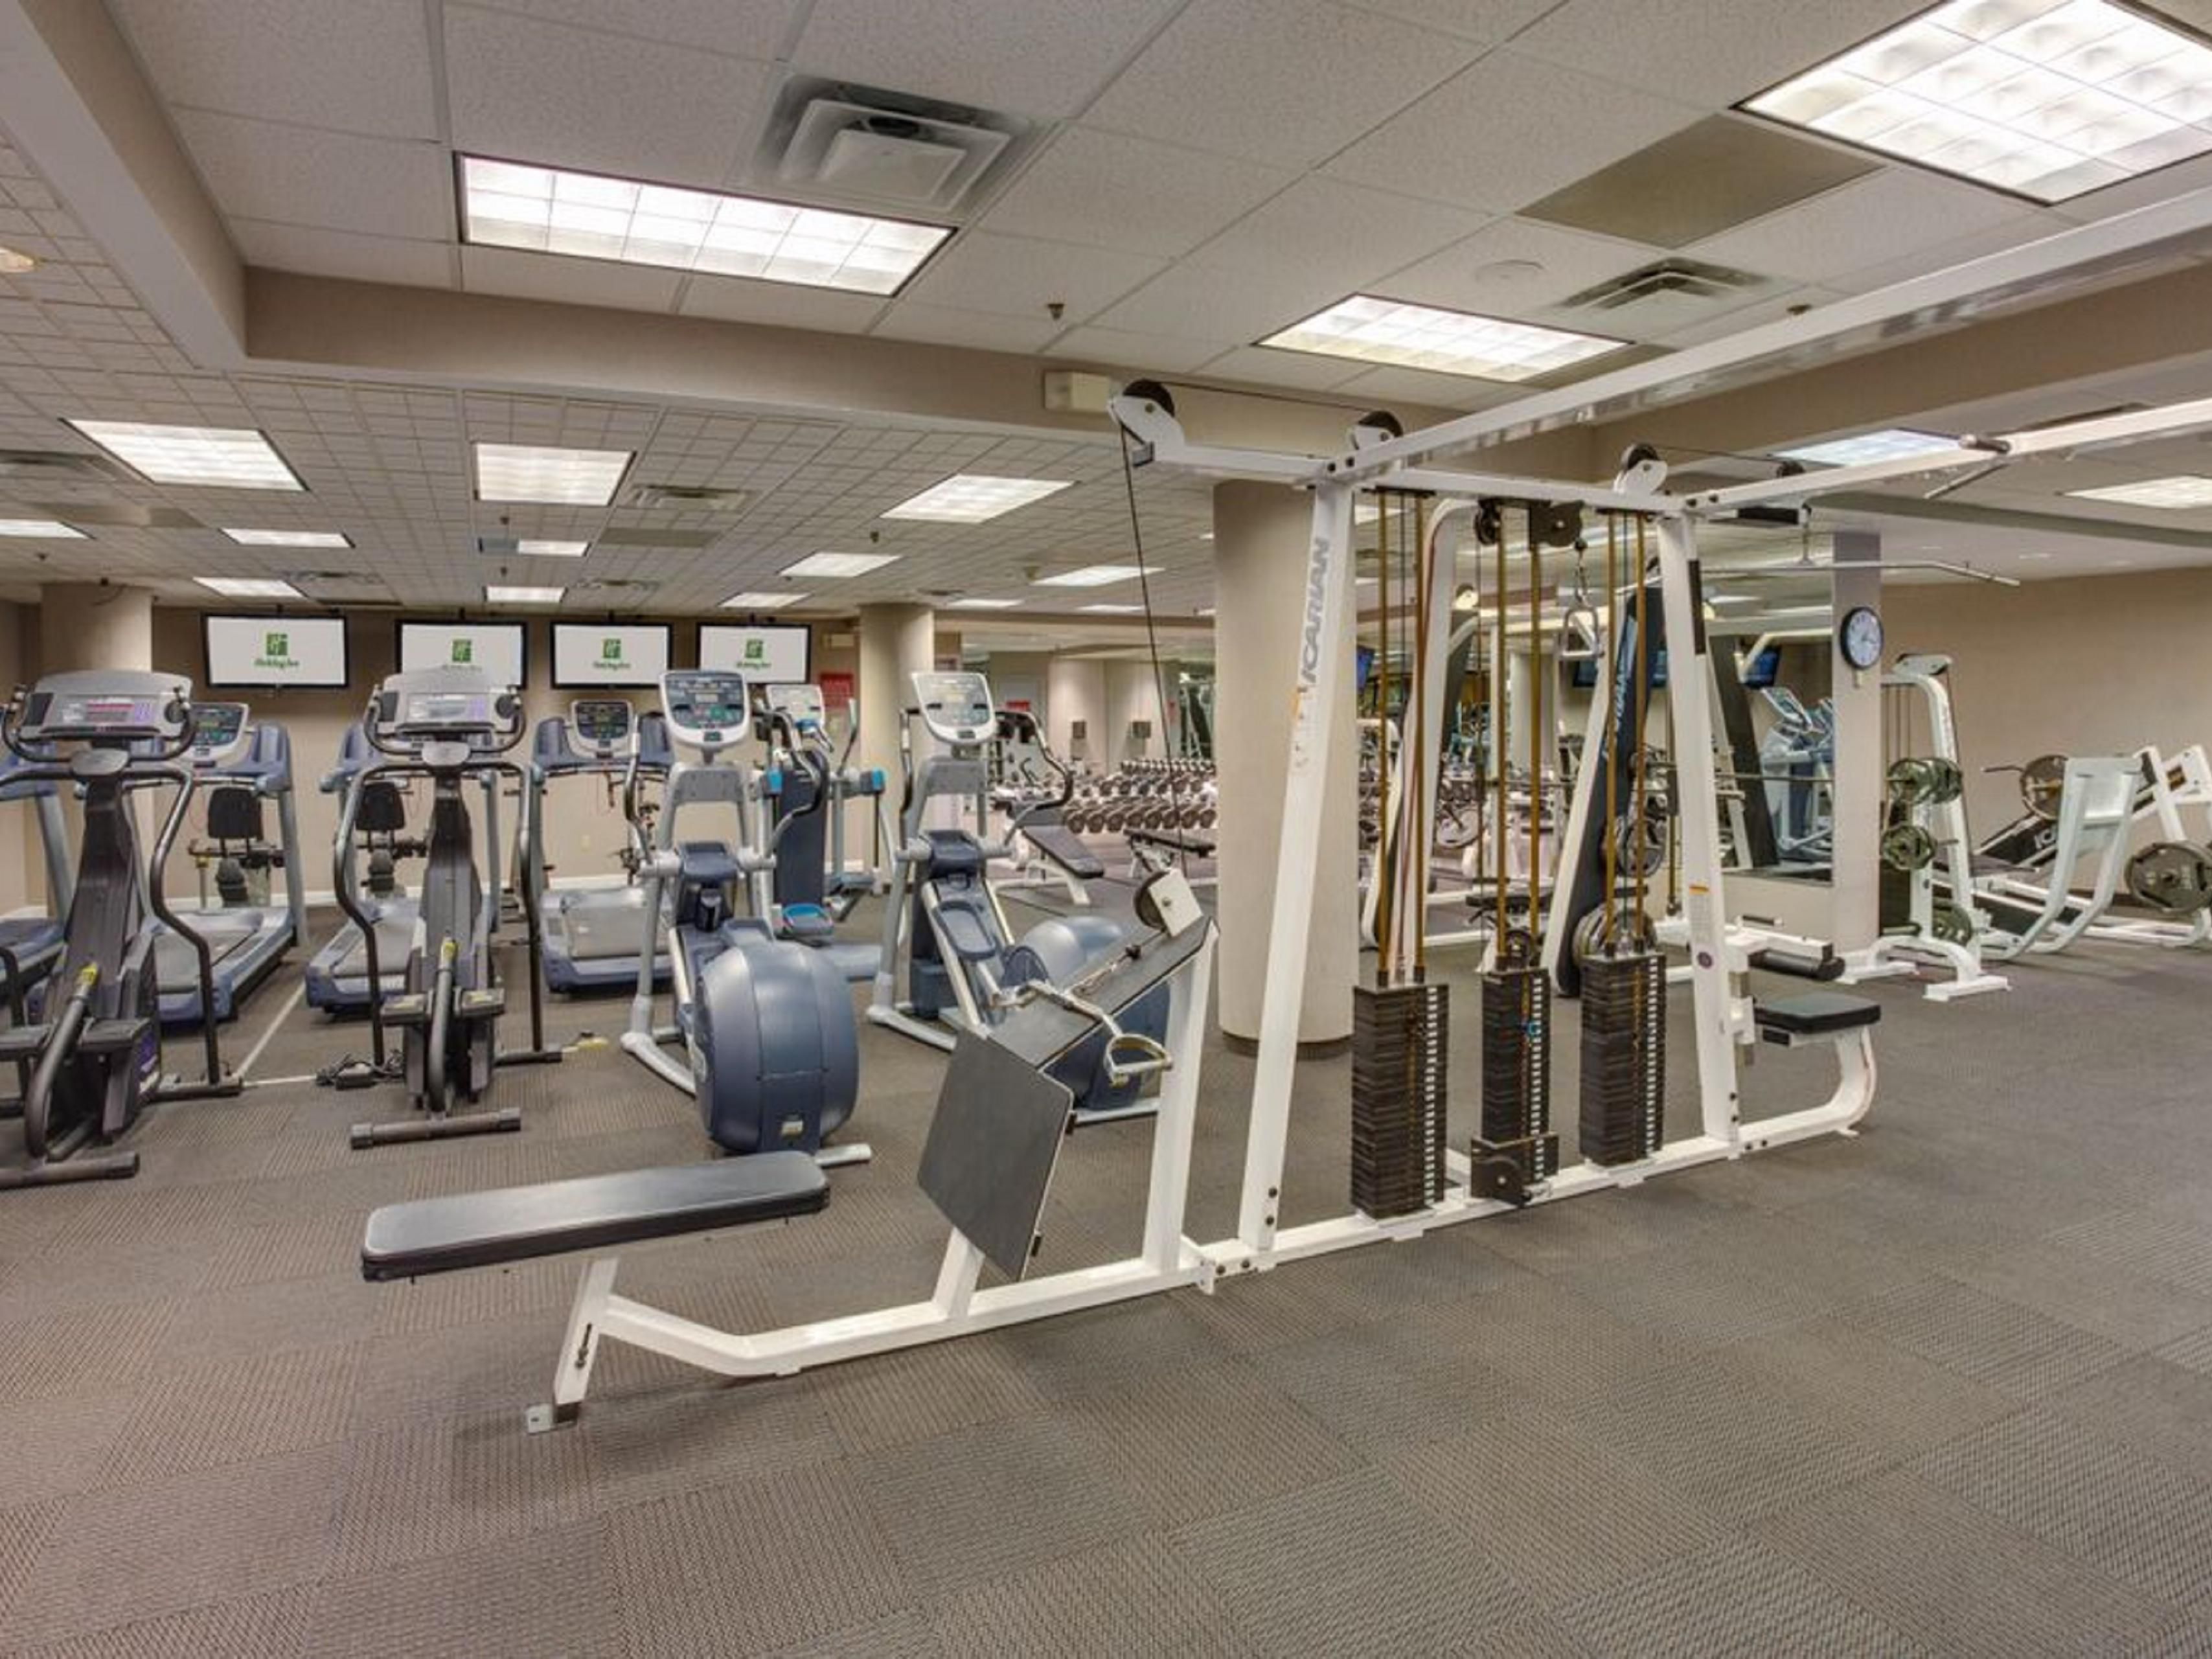 Get your sweat on with our 3,000-square-foot fitness center, open 24 hours a day.